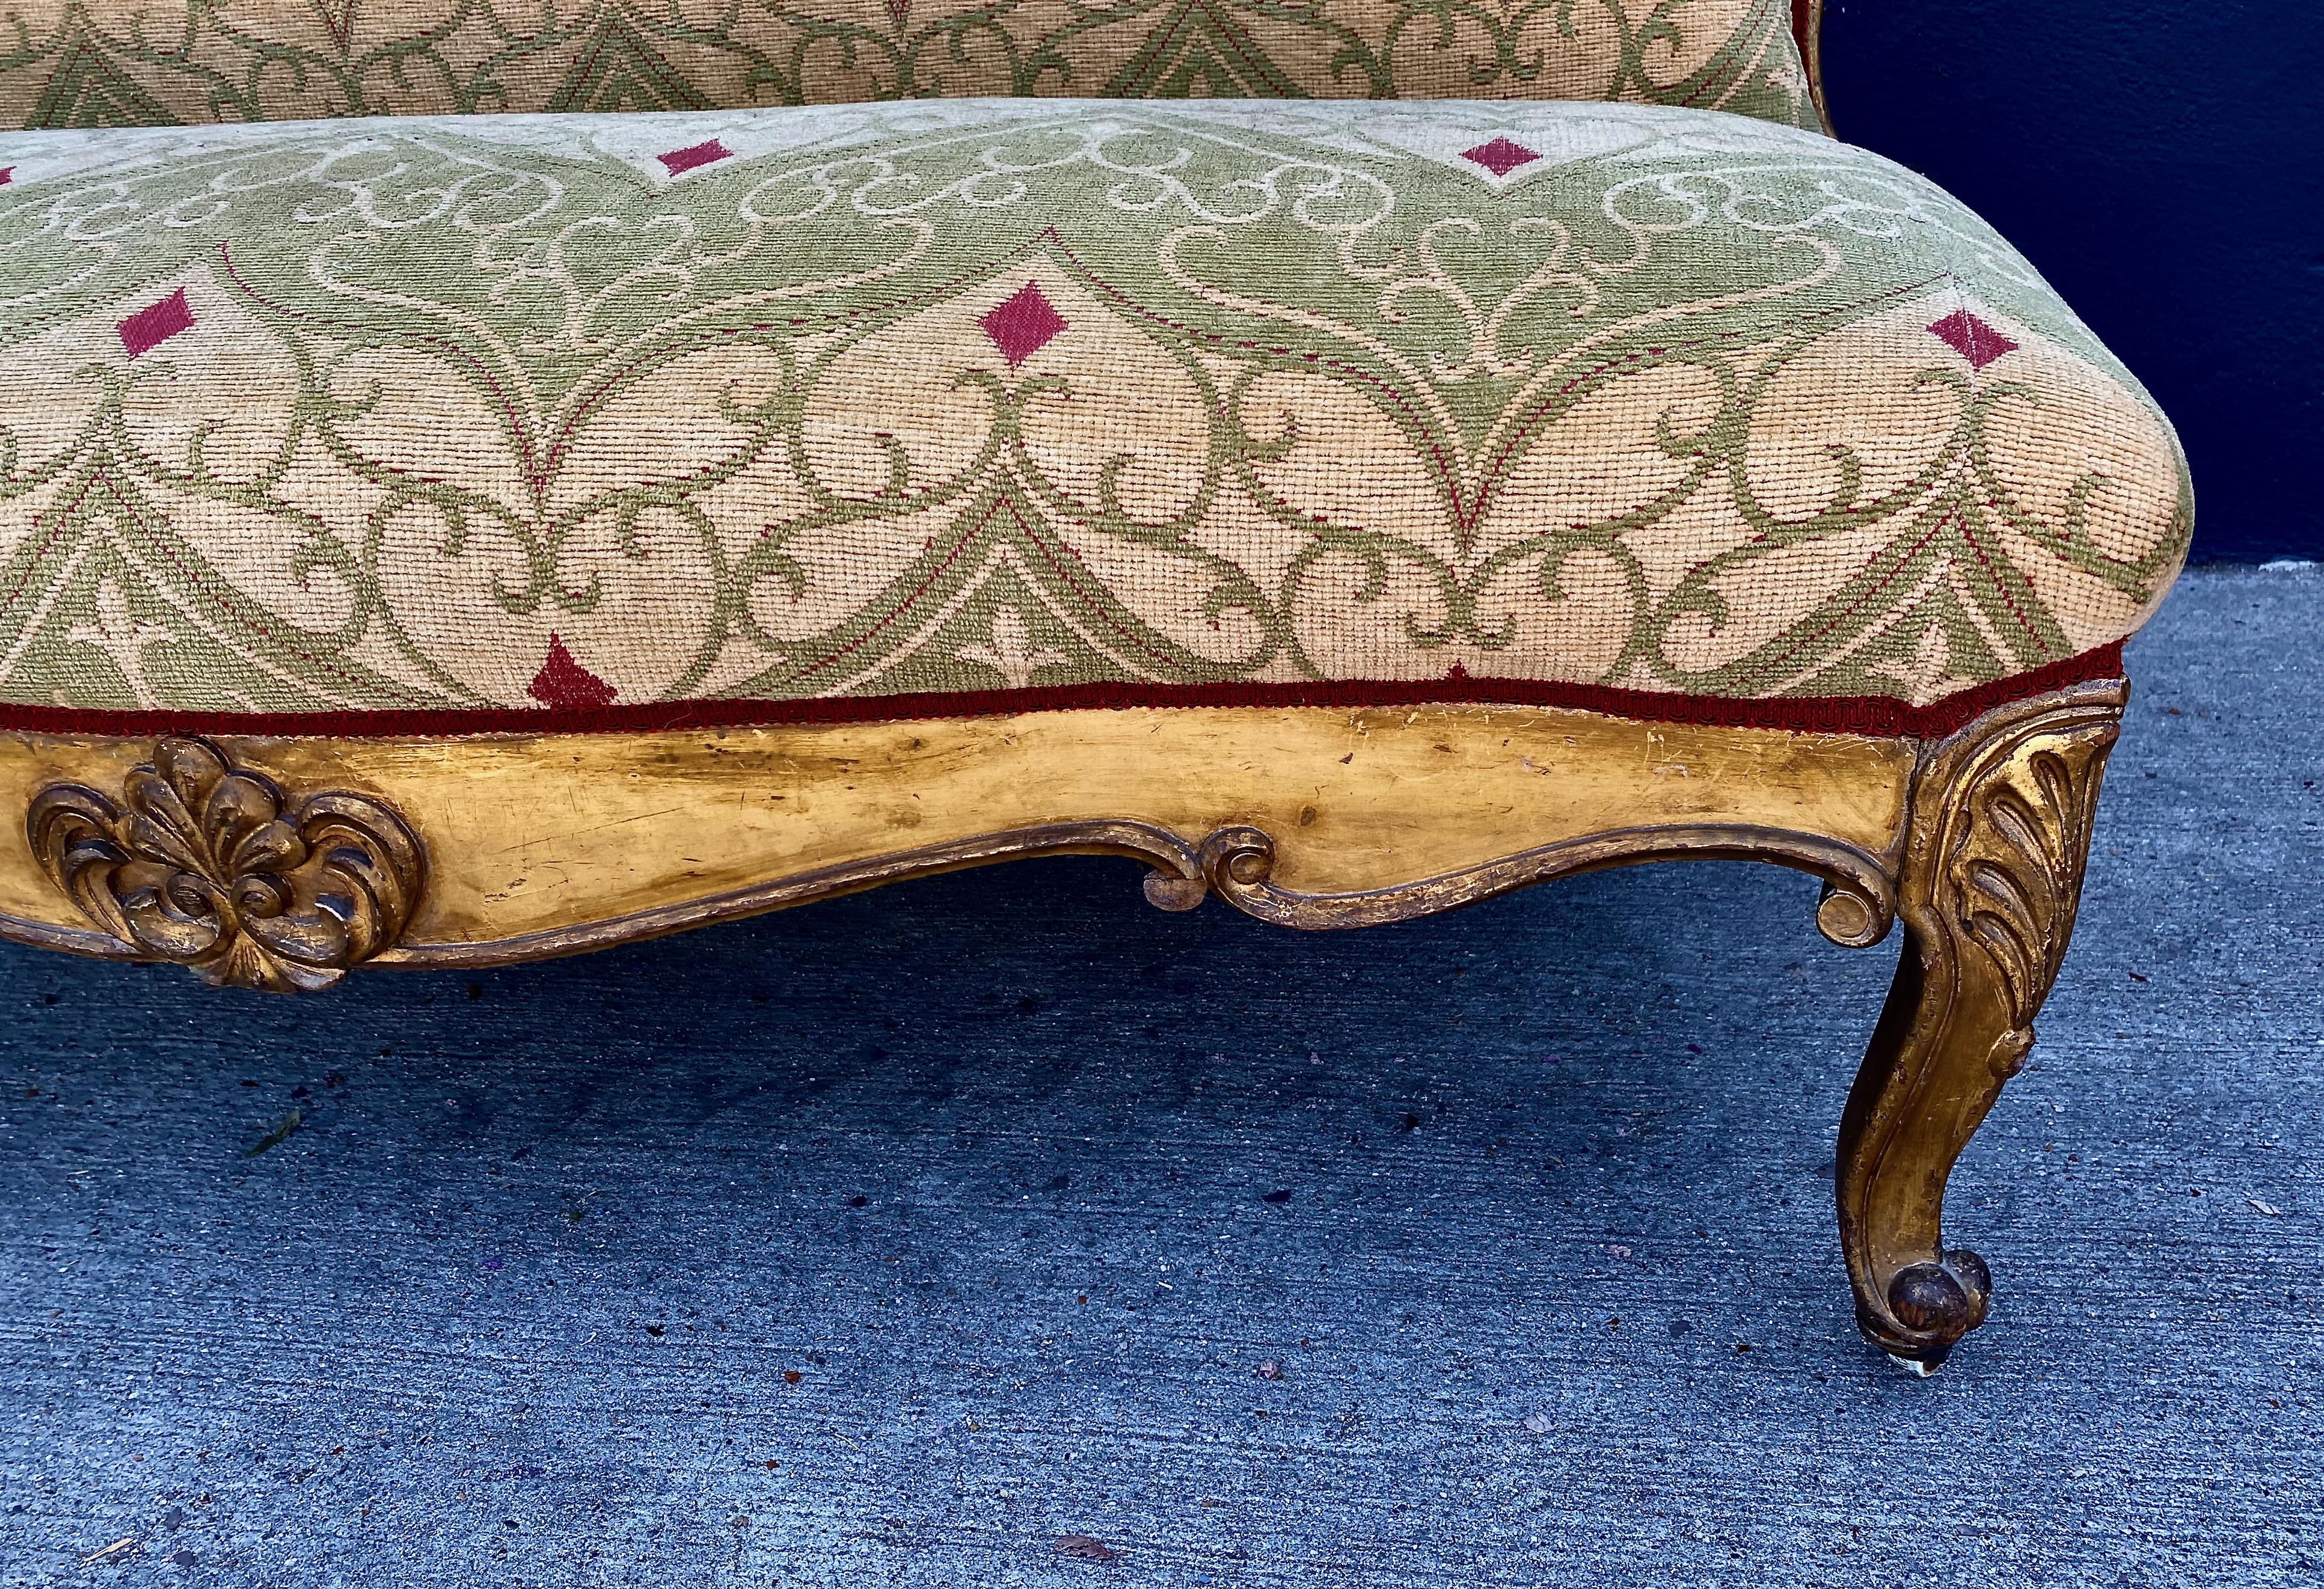 19th Century Rococo-Style Gilt Settee or Bench For Sale 1